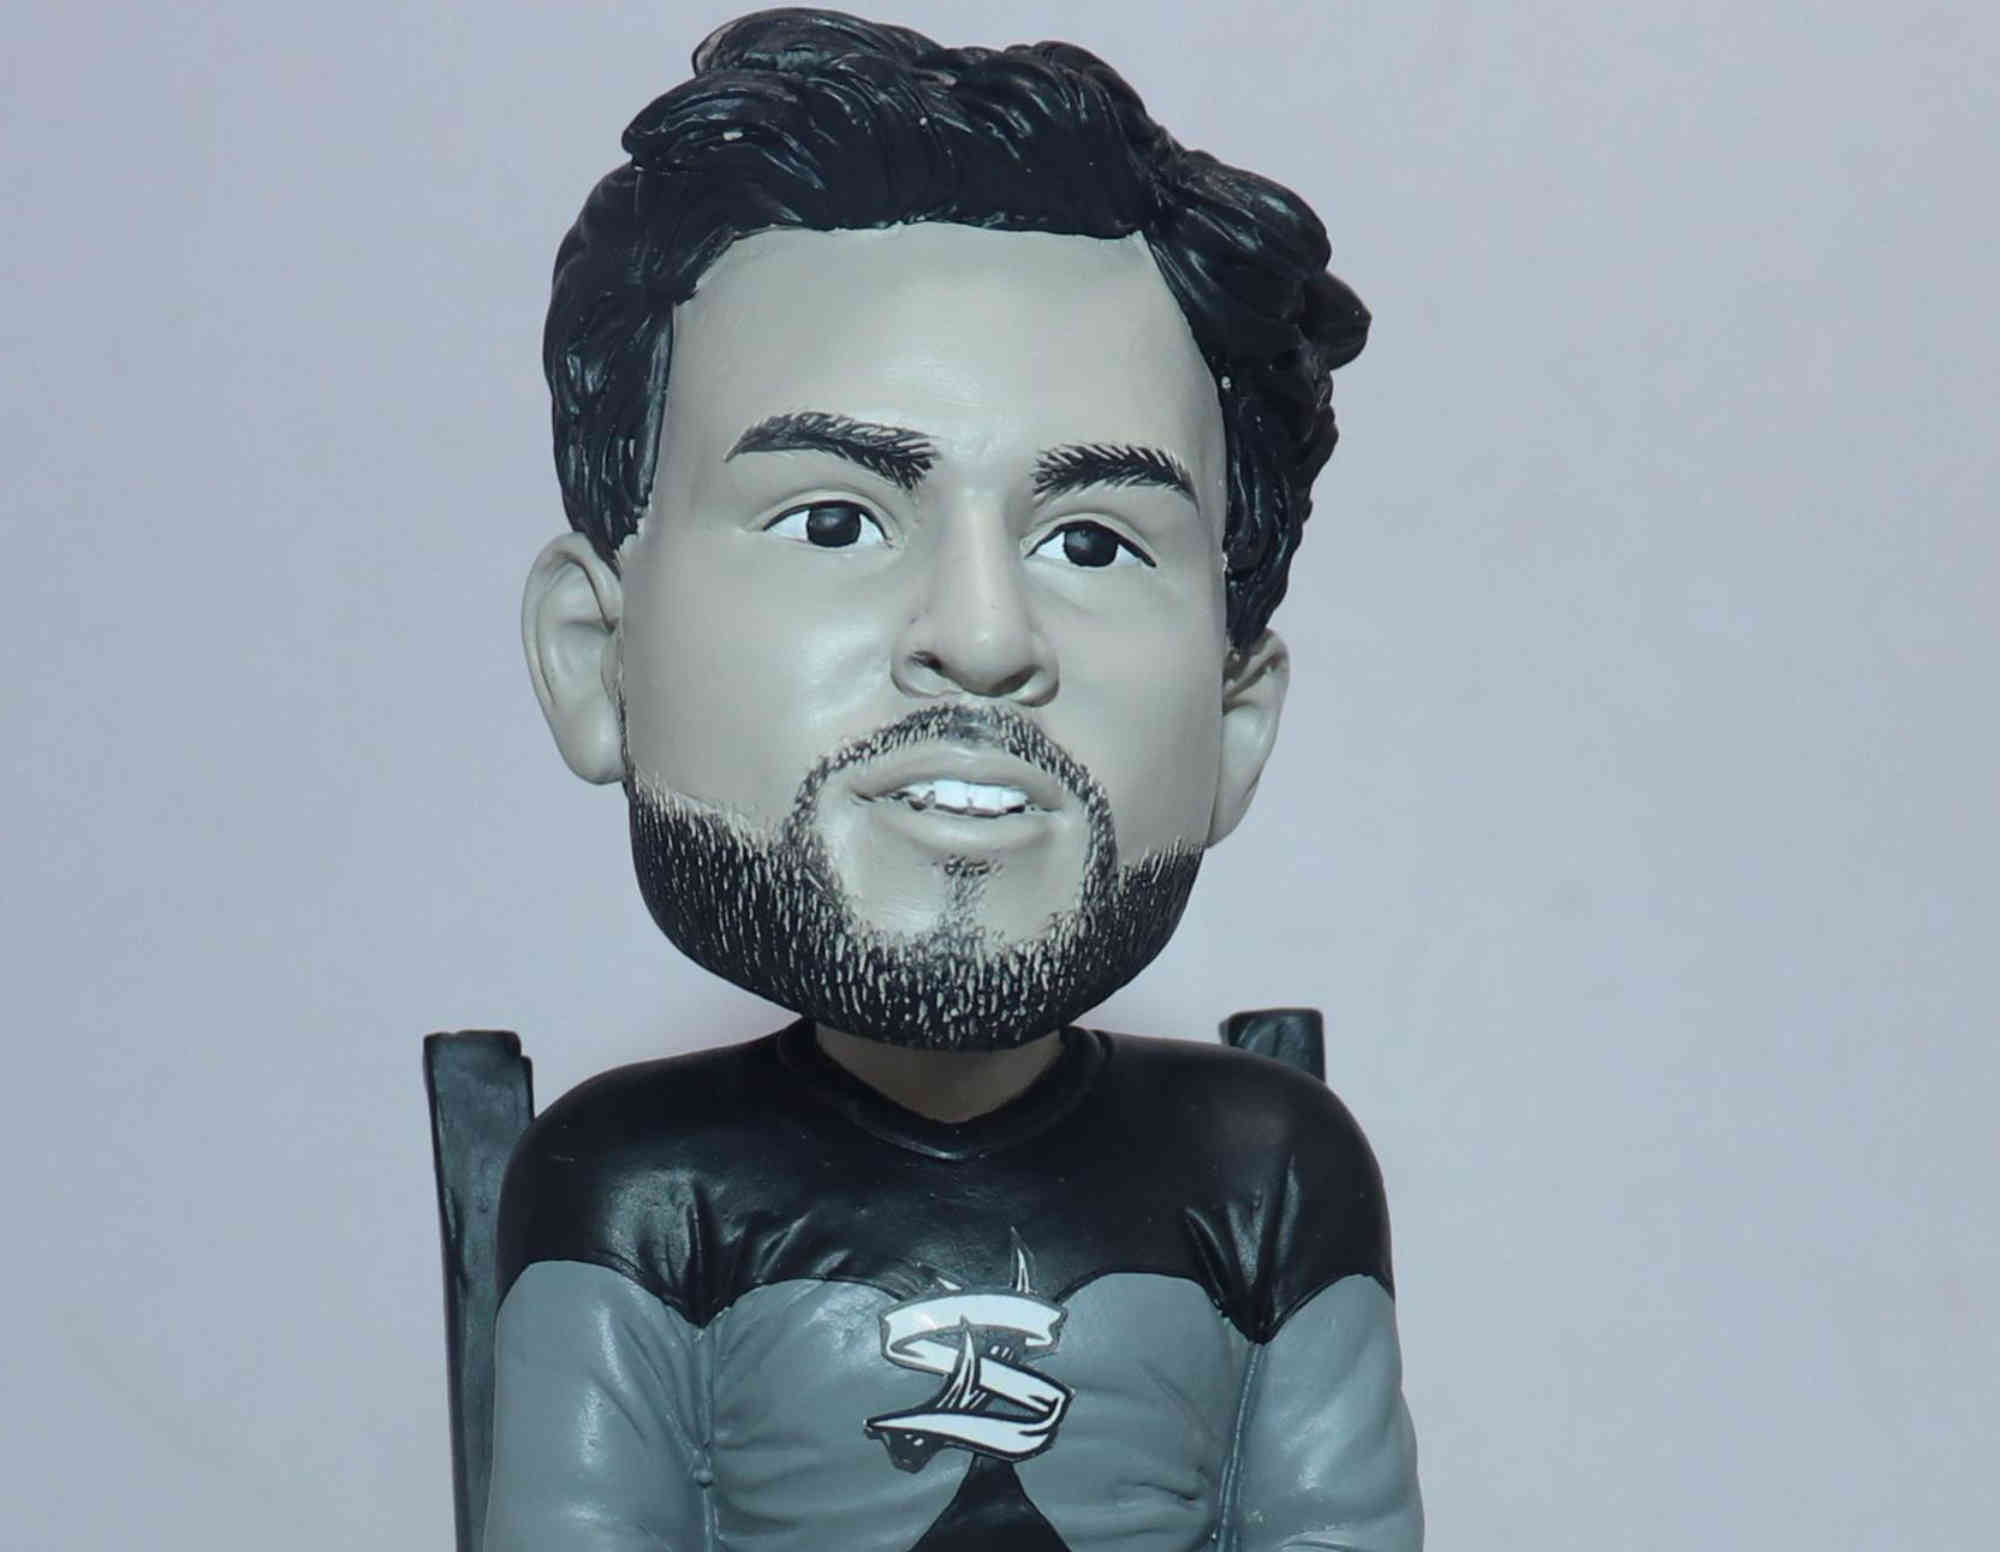 Bobbleheads From Our Dreams, Animated And Brought To Life 